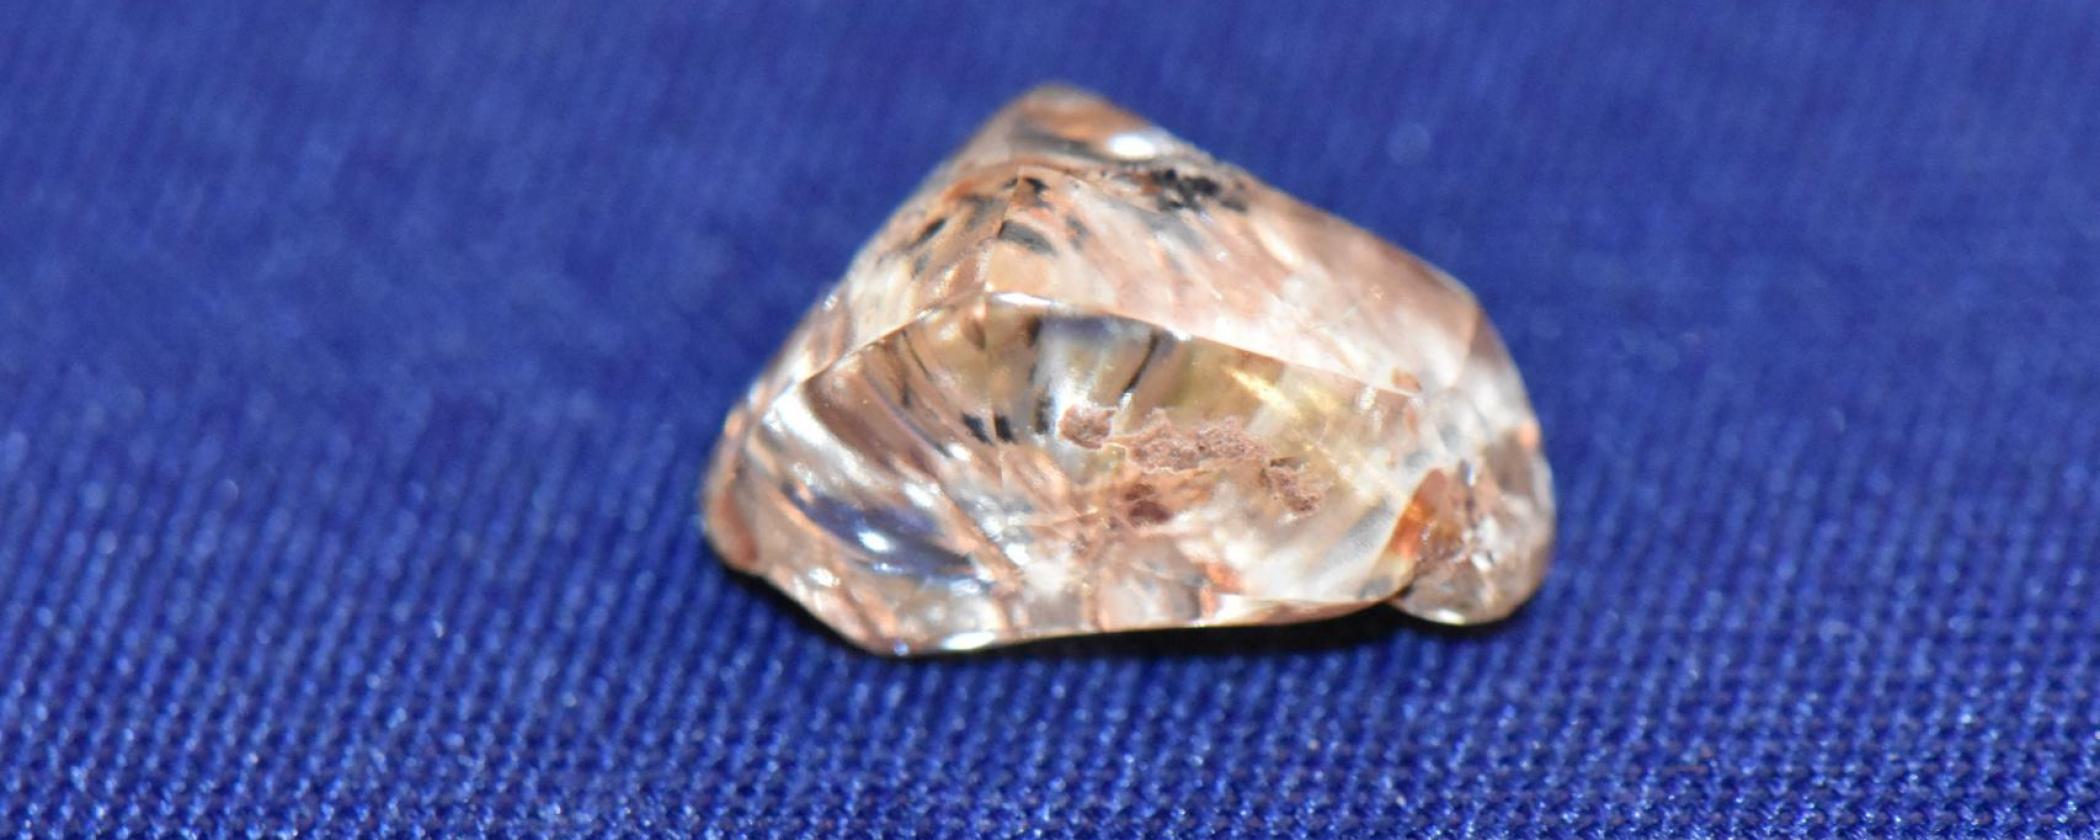 A diamond found at a state park in Arkansas